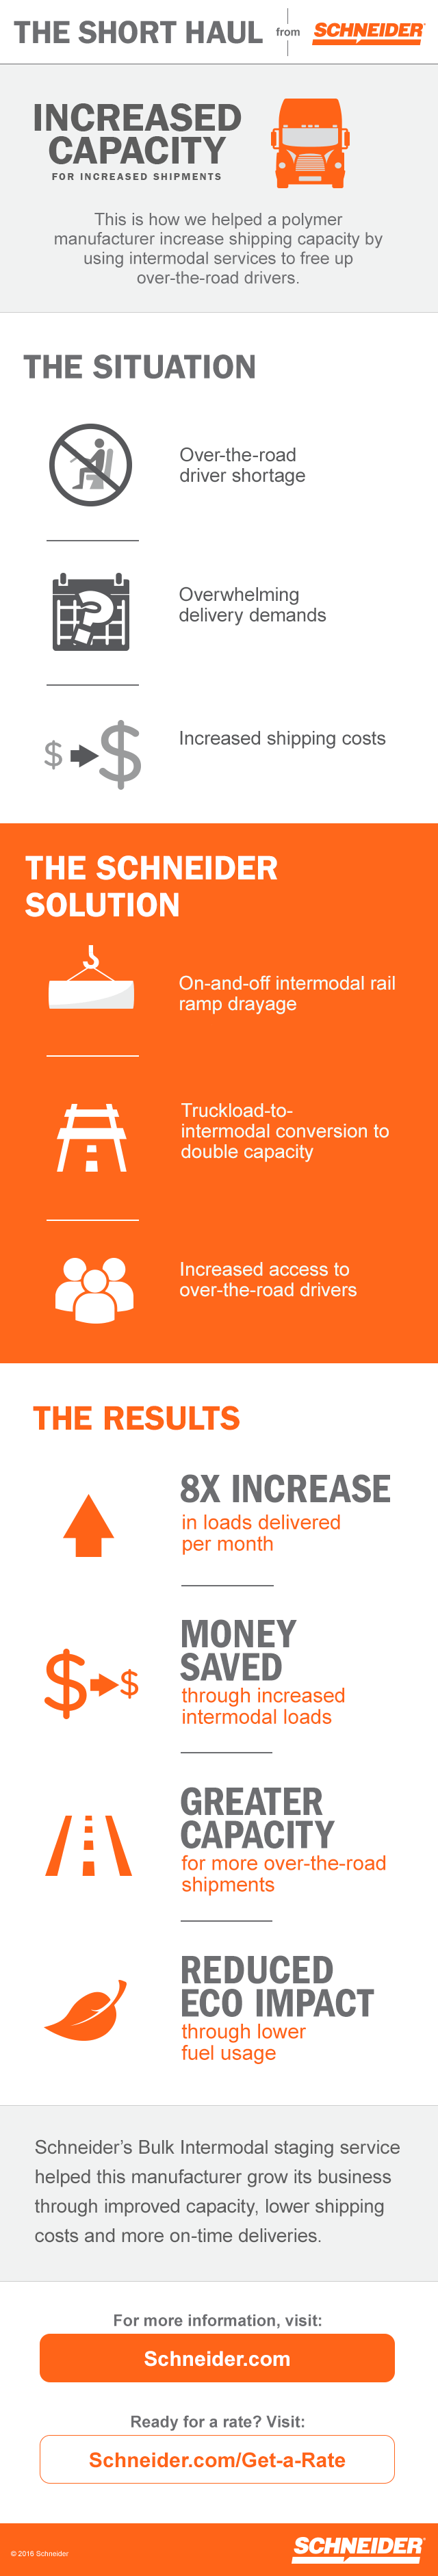 Increased Capacity Infographic